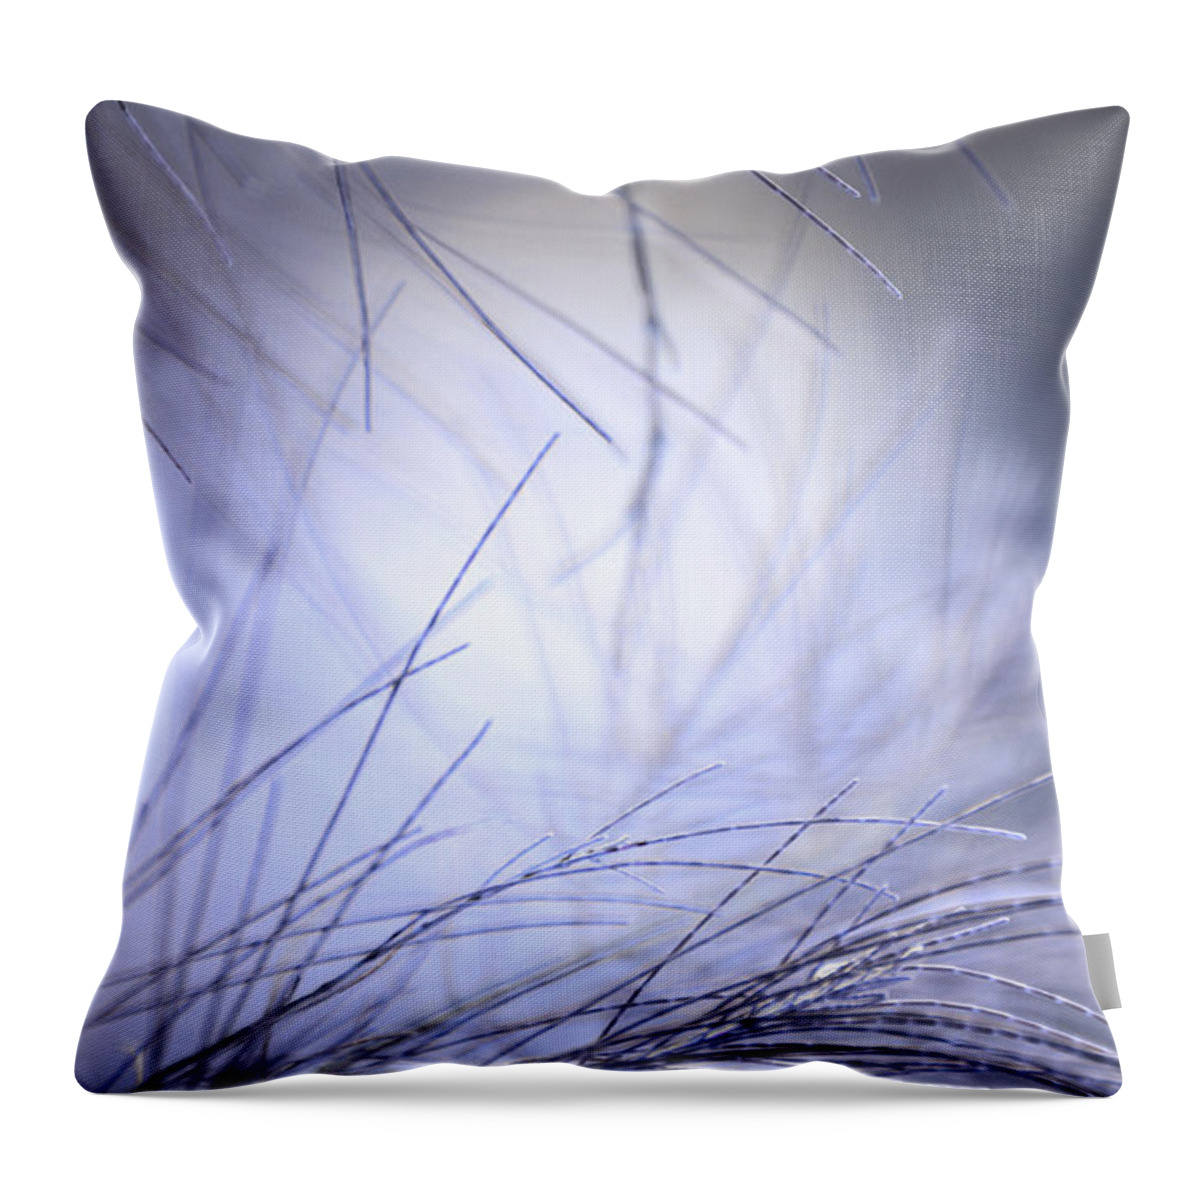 Pine Throw Pillow featuring the photograph Pine Tree Needles by Jenny Rainbow